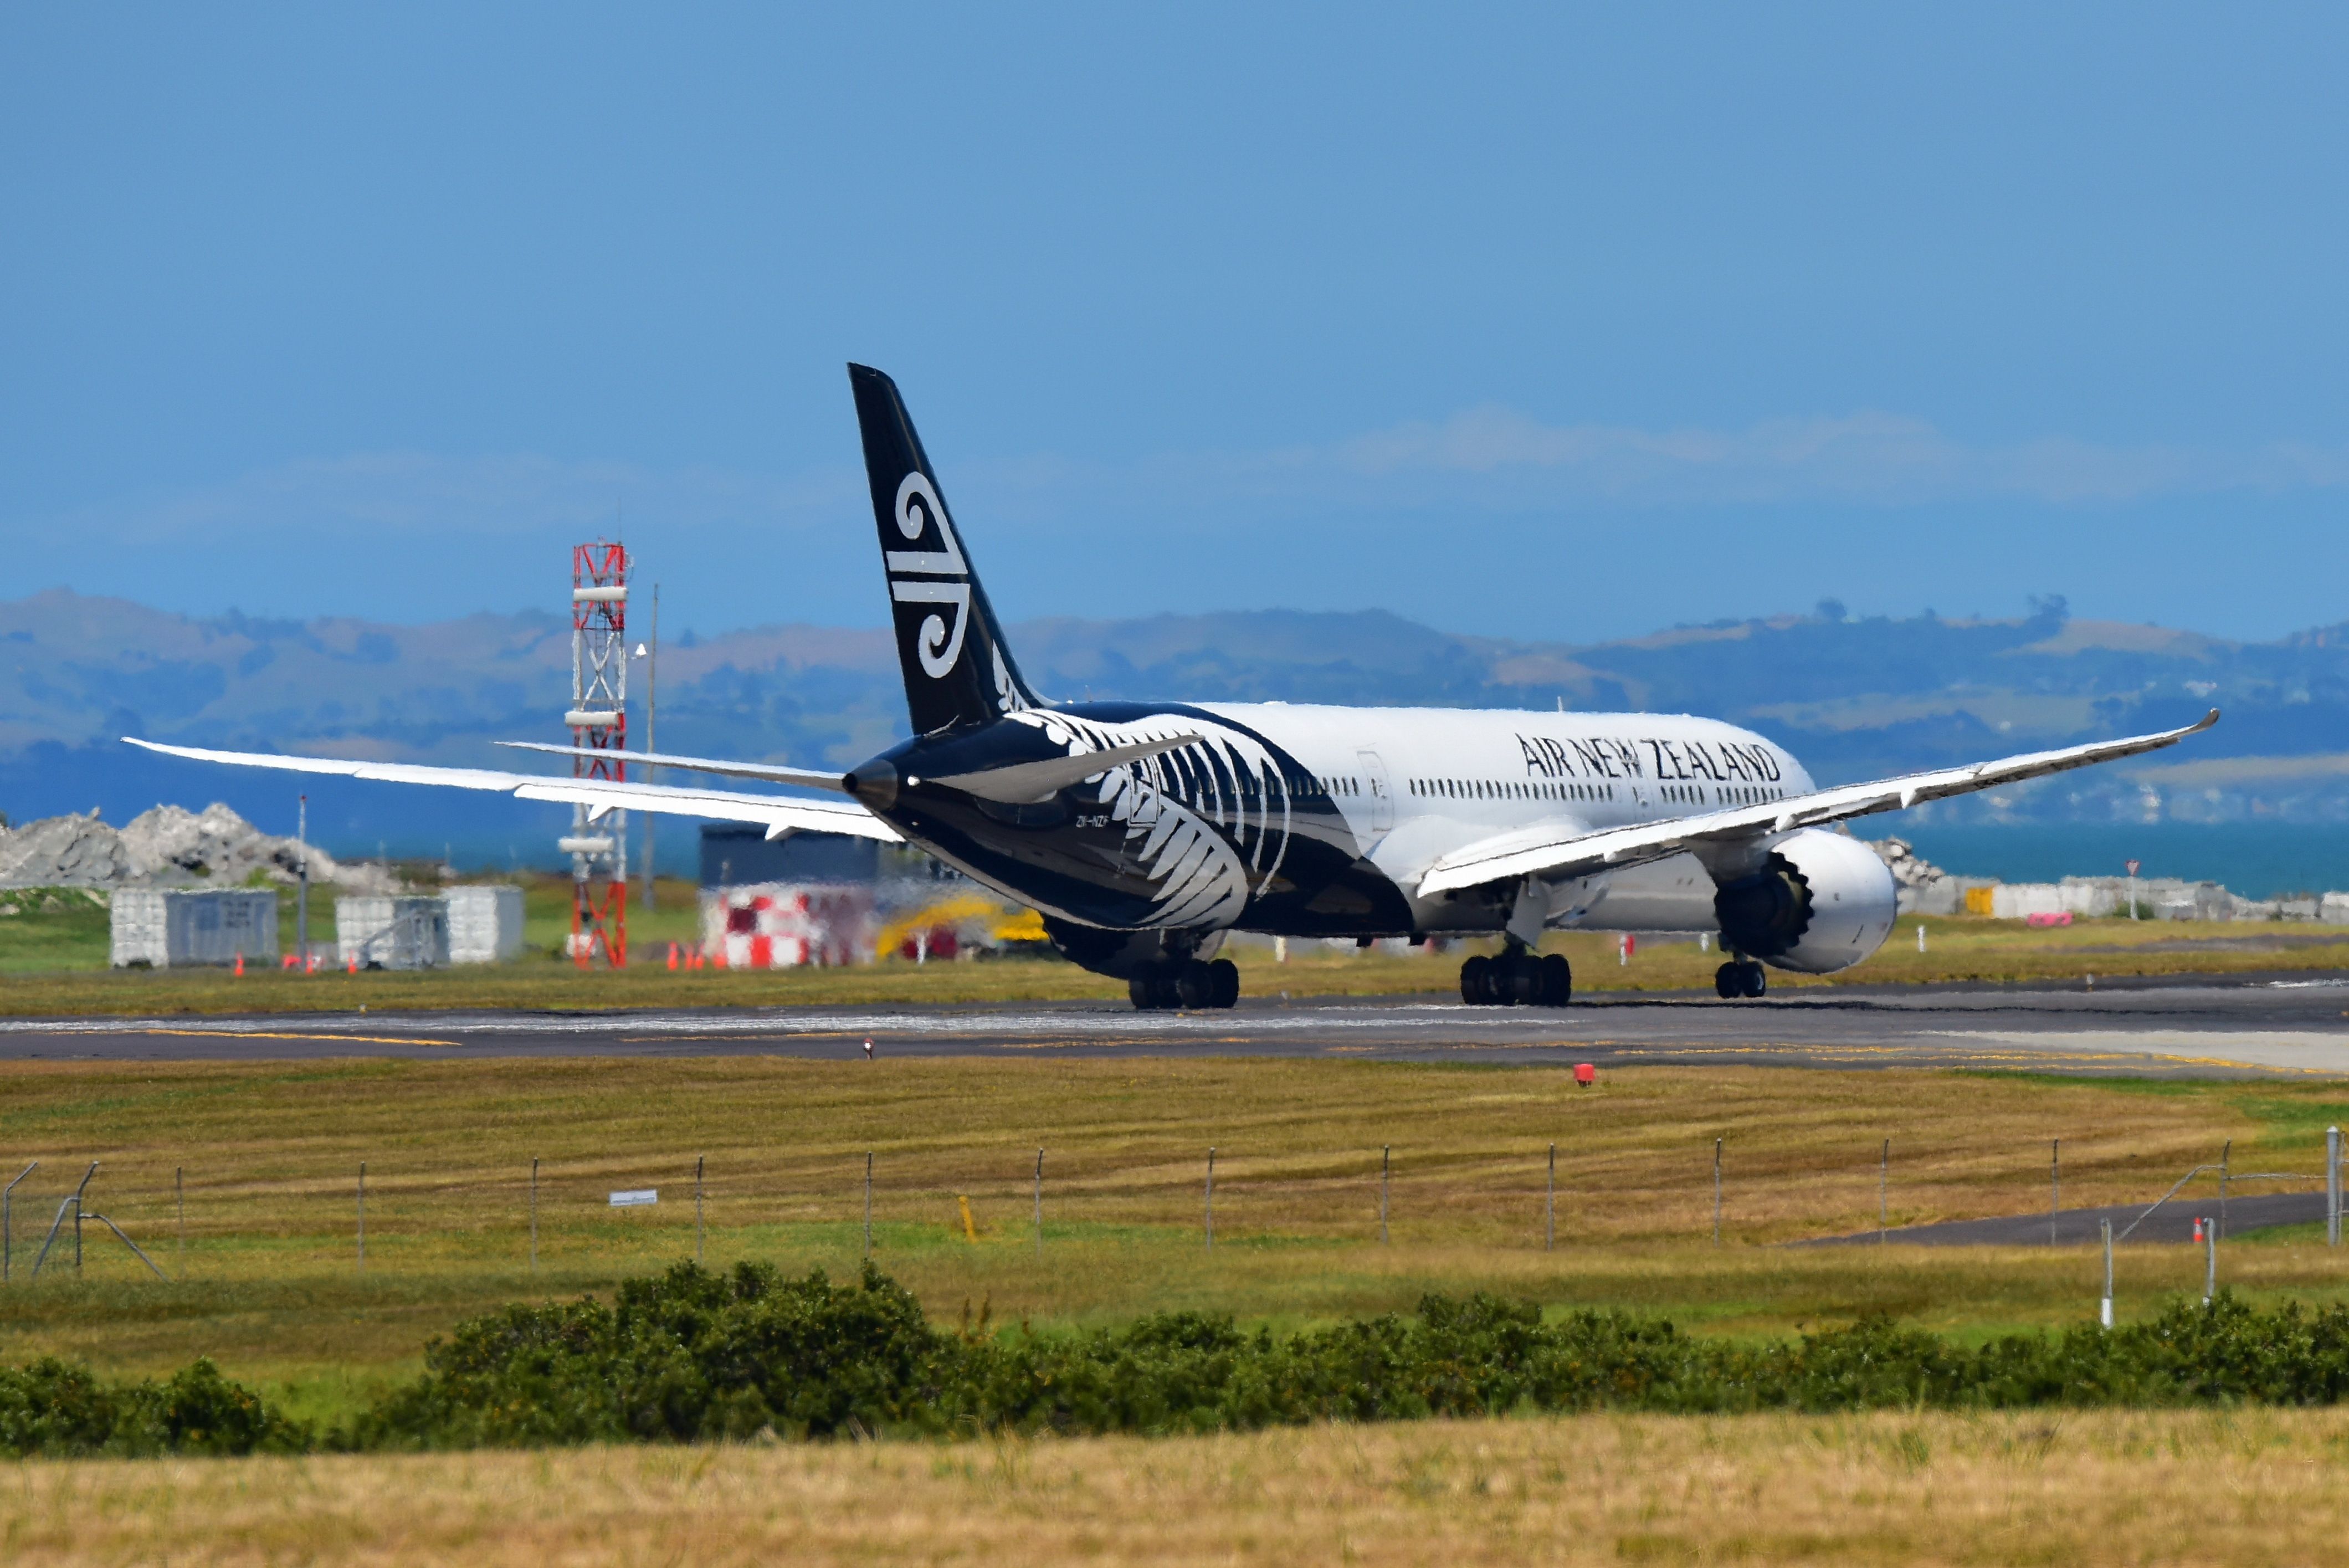 An Air New Zealand Boeing 787-9 Dreamliner taxiing at Auckland International.